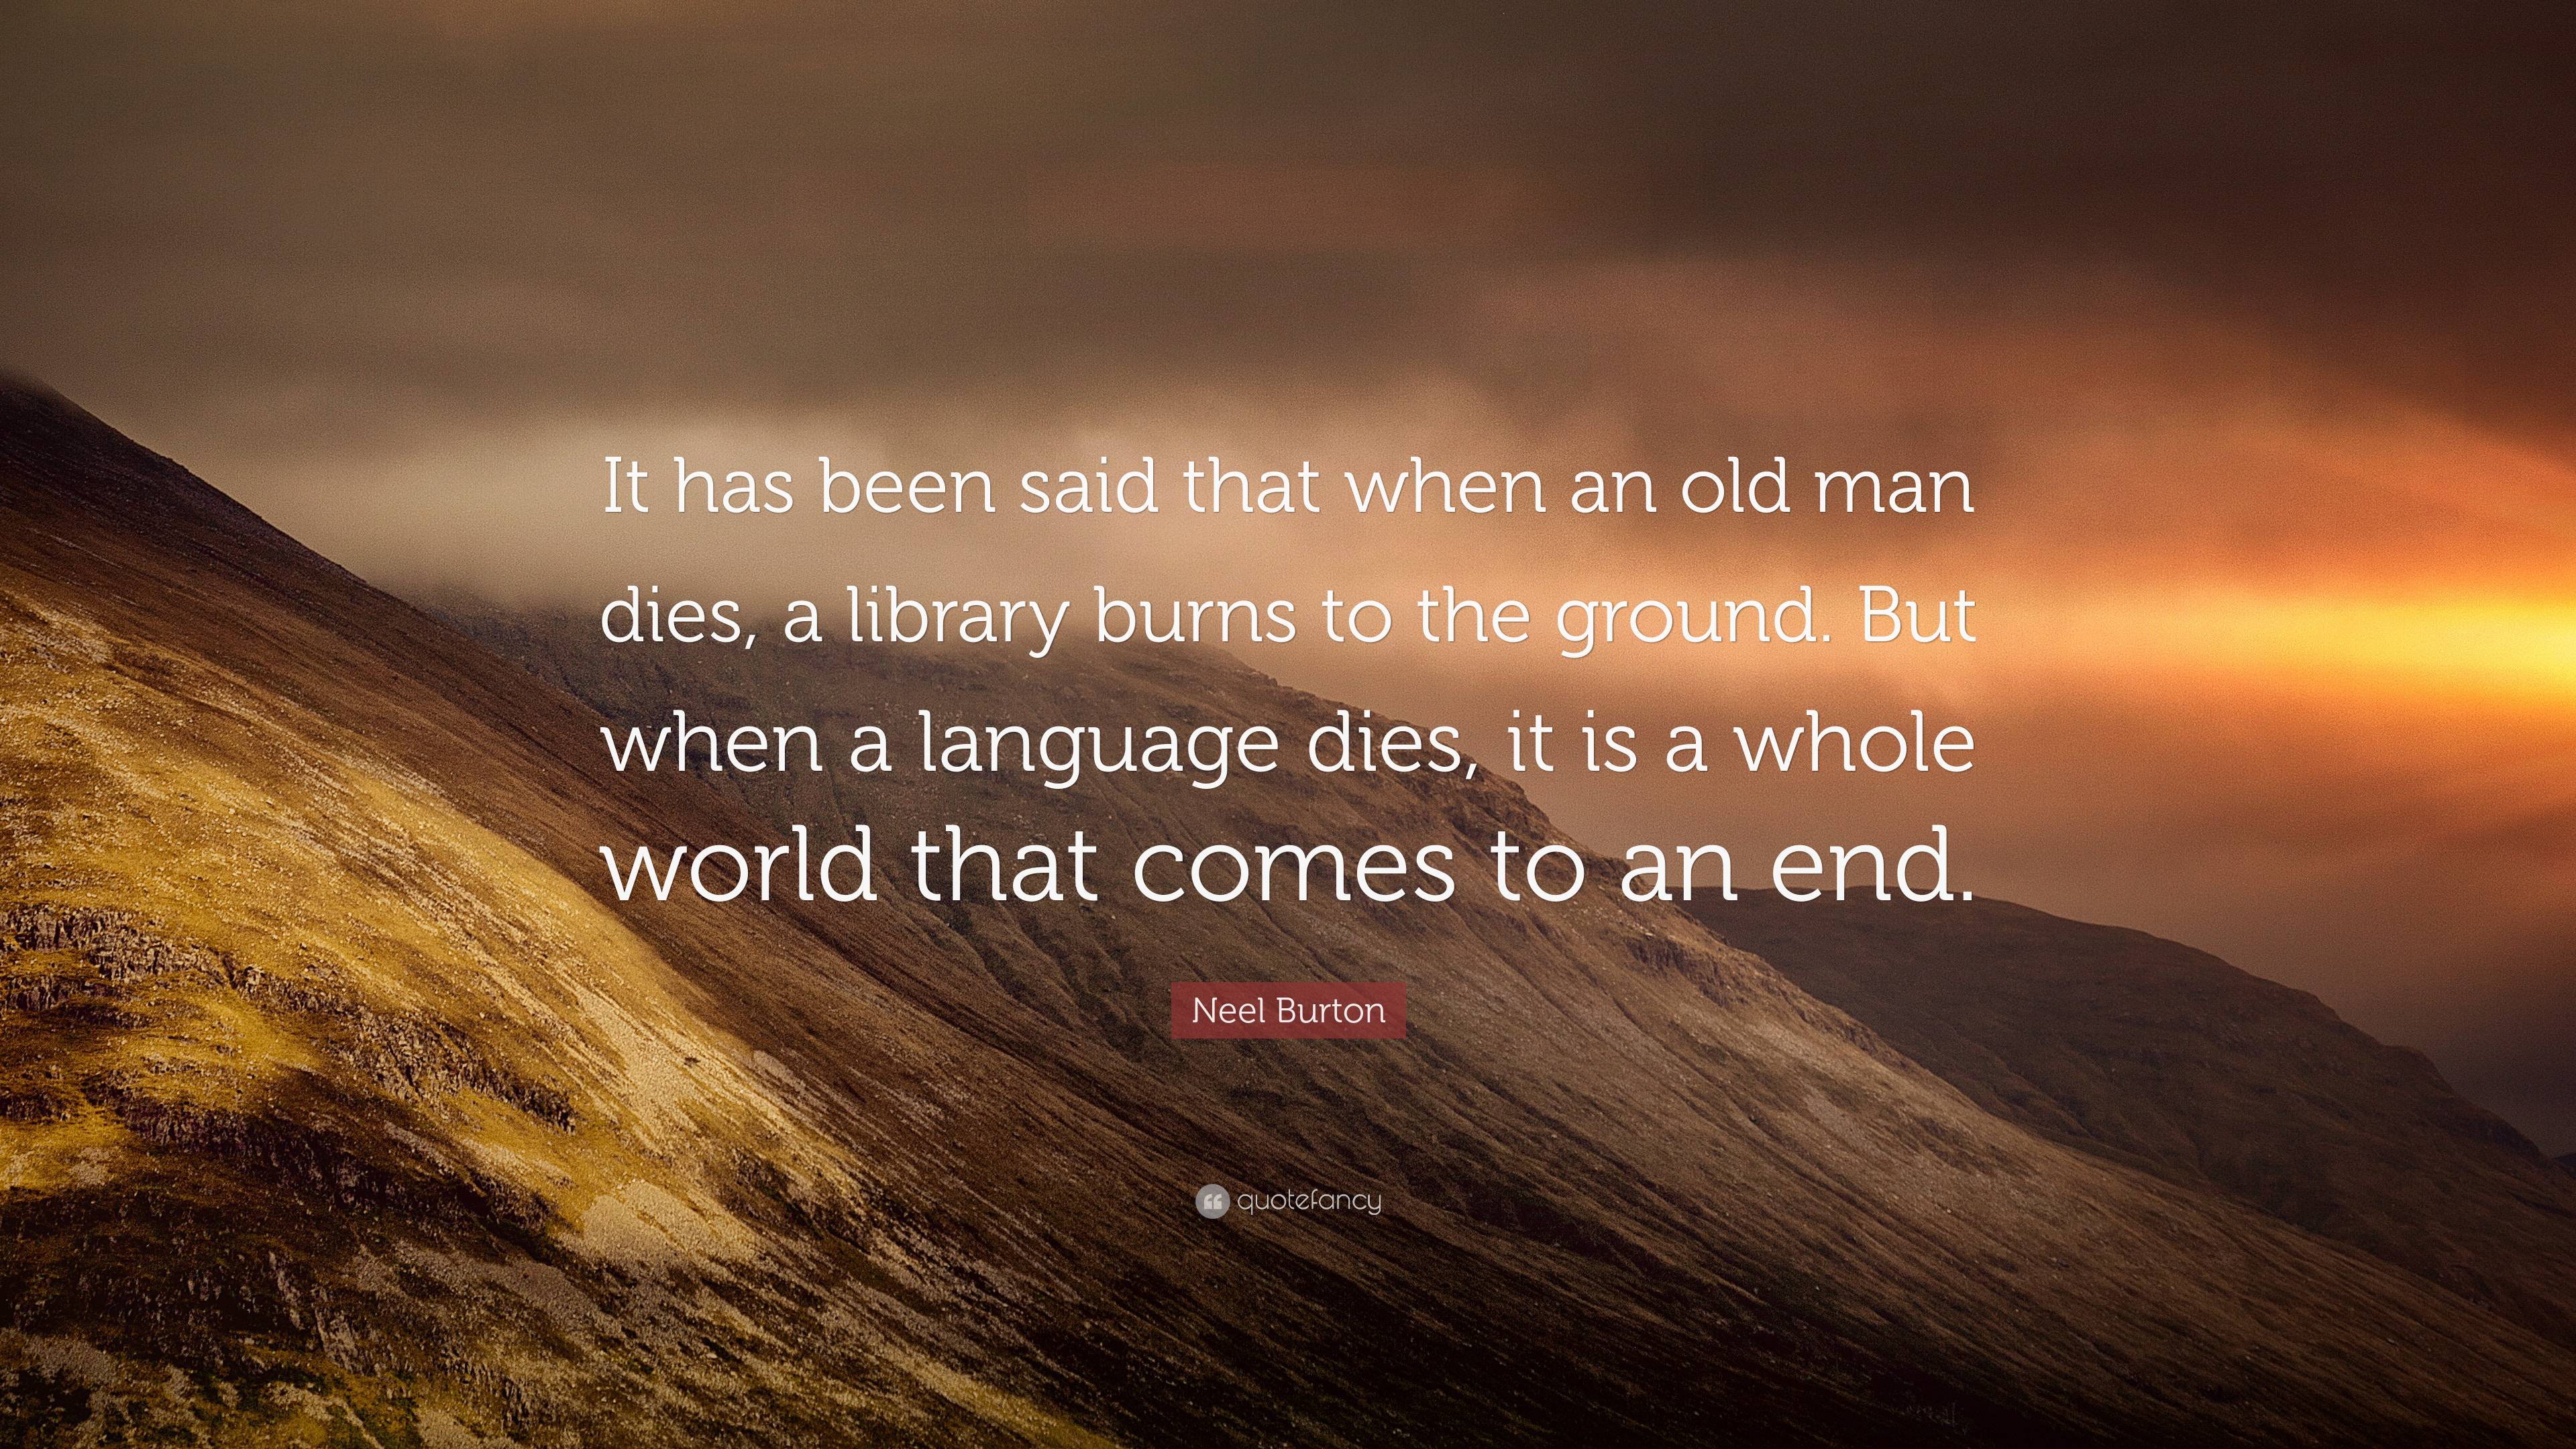 7143043 Neel Burton Quote It Has Been Said That When An Old Man Dies A 